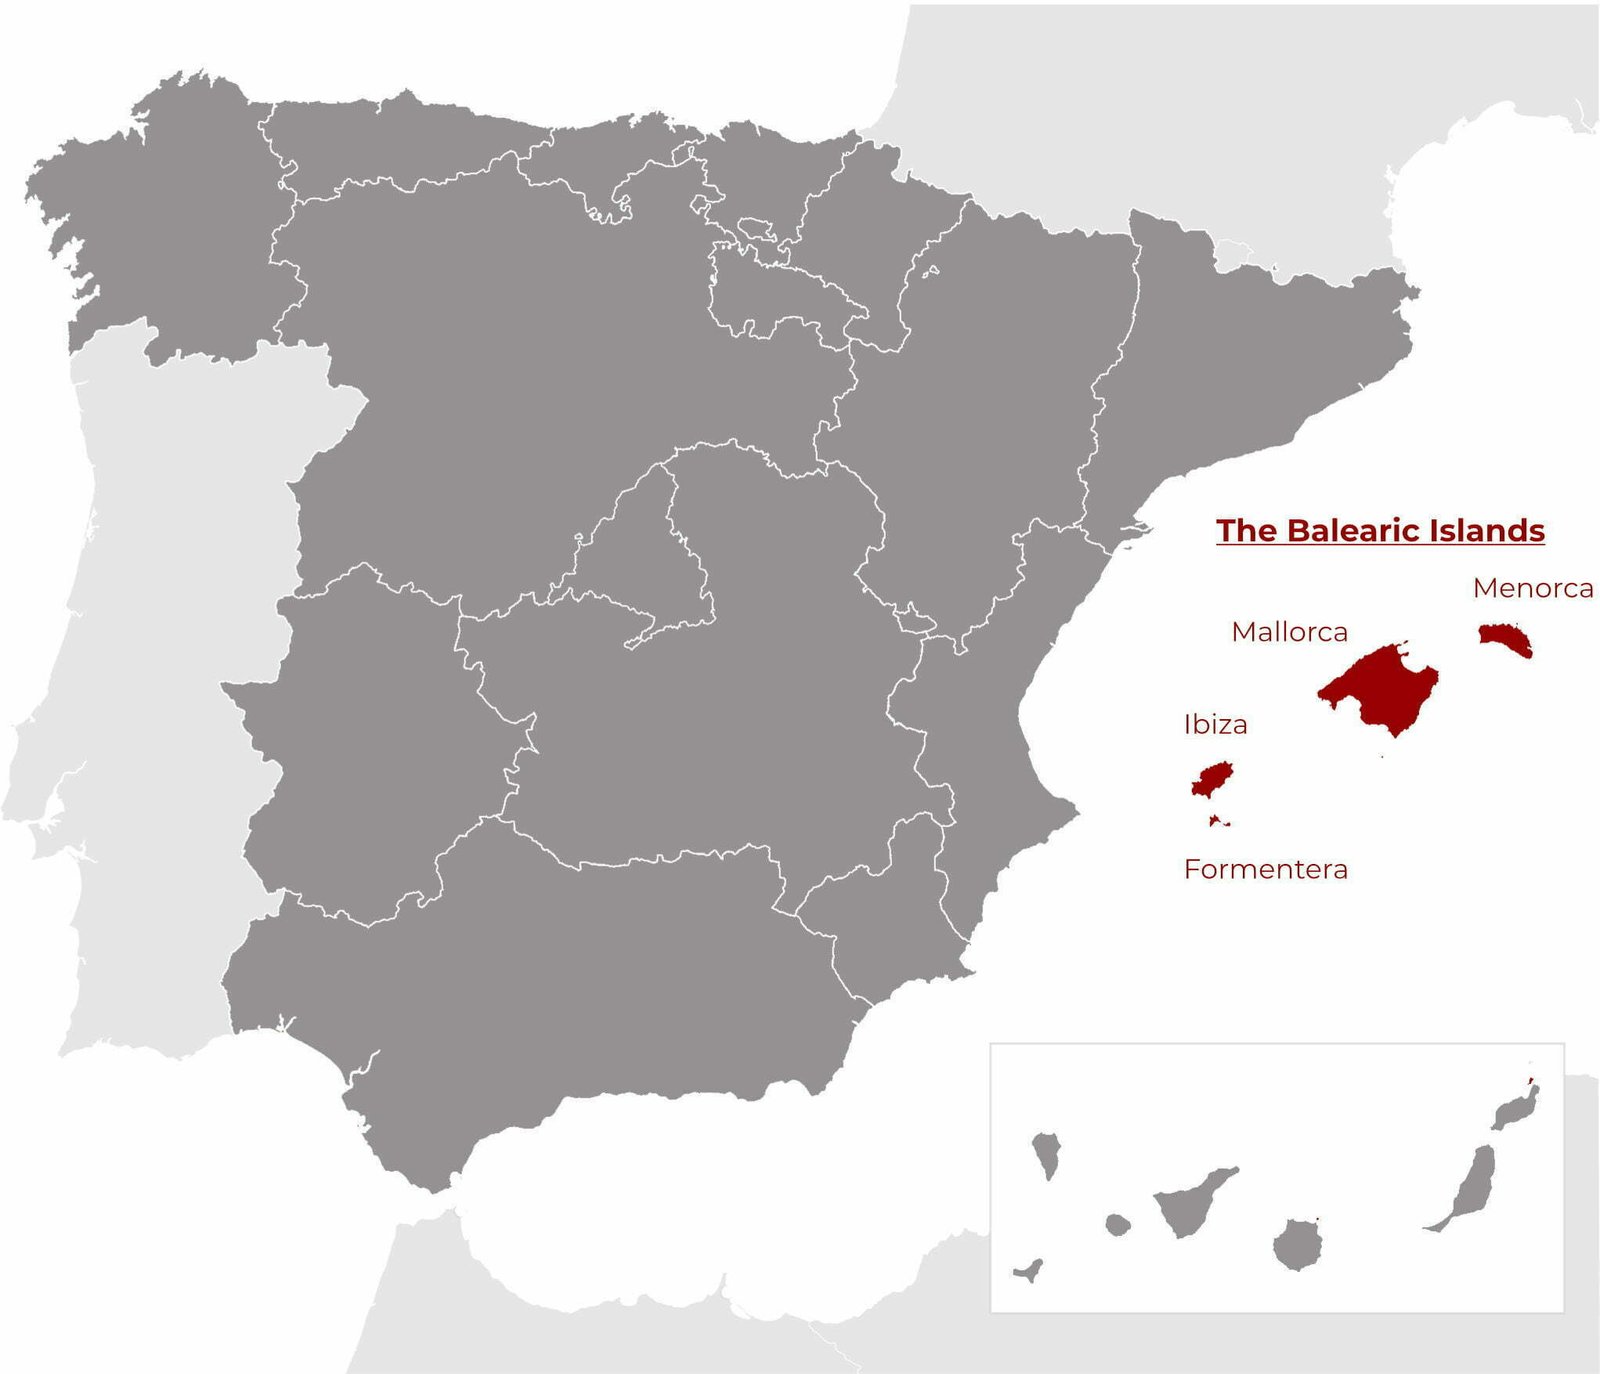 An infographic showing a regional map of Spain and the location of the Balearic Islands